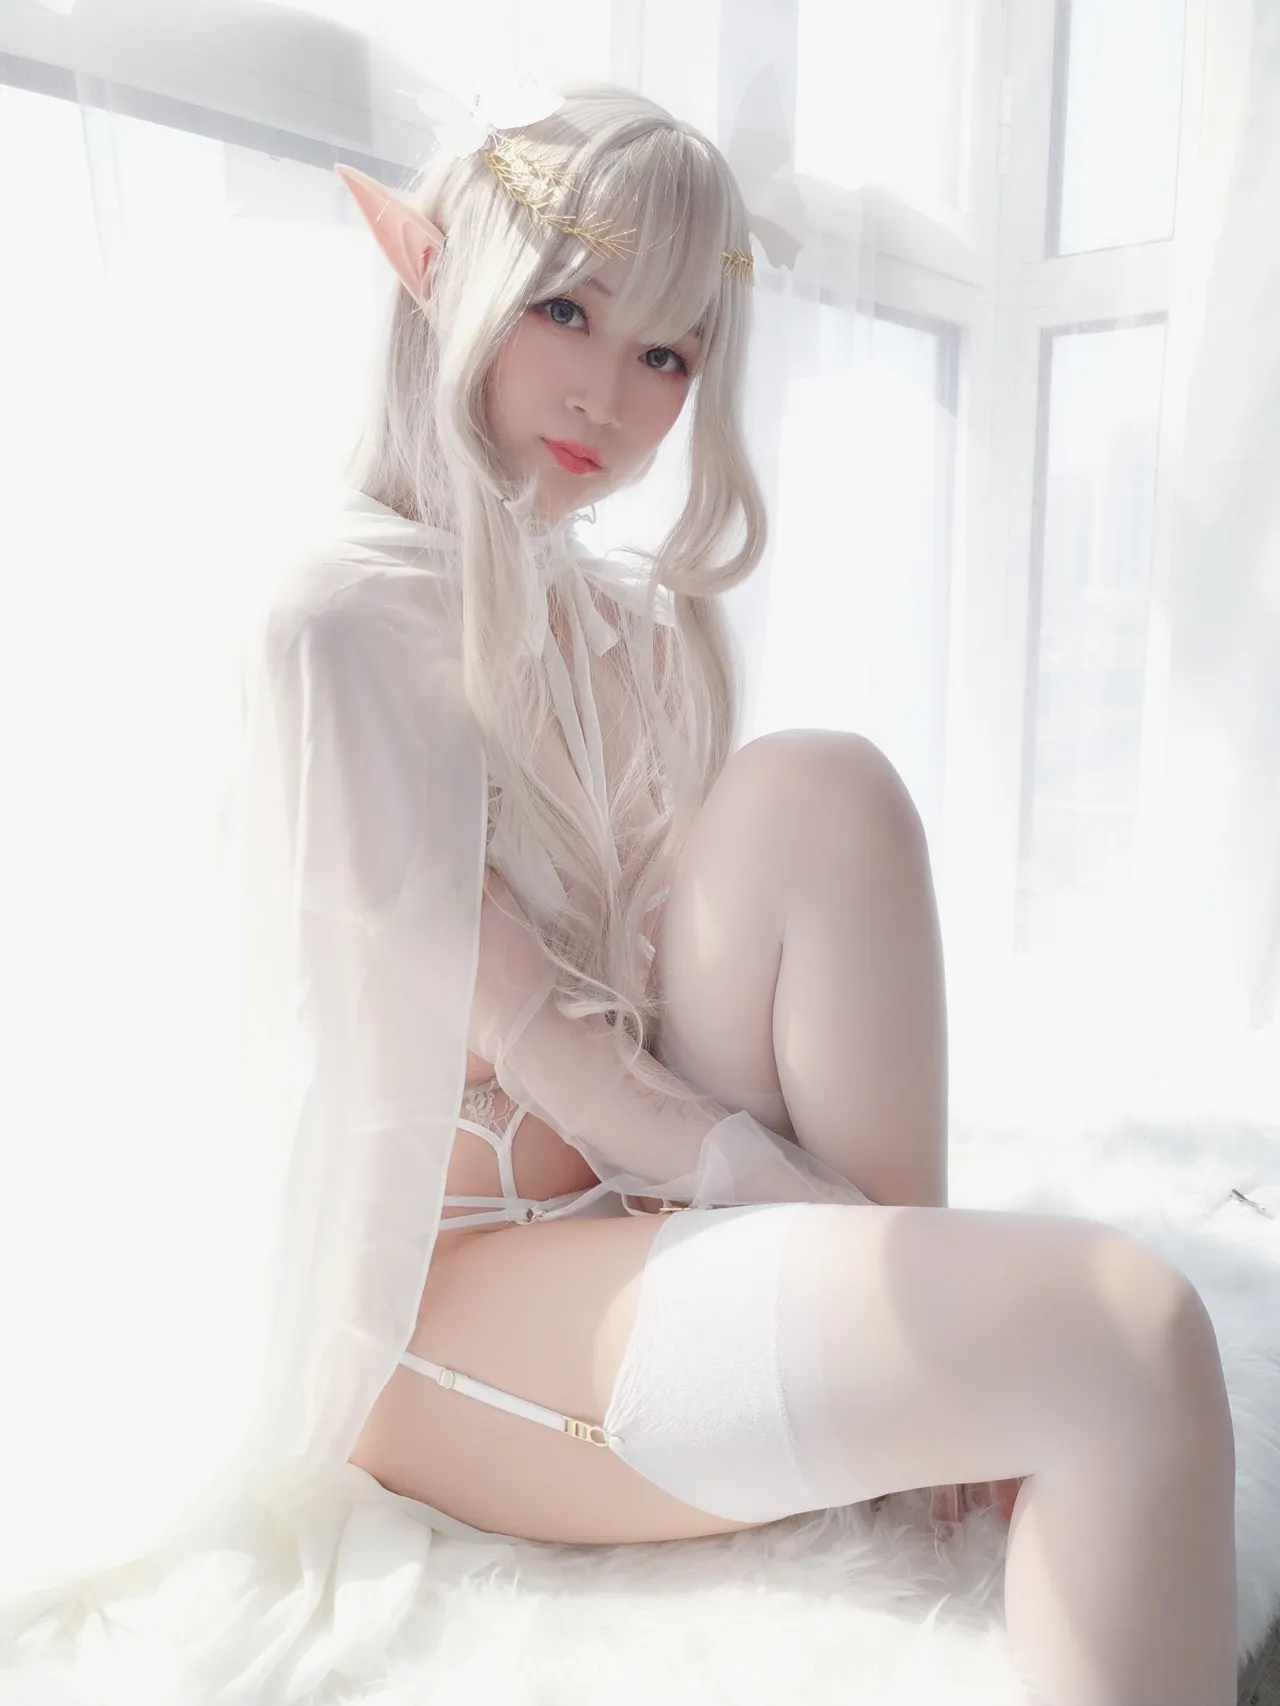 Coser@白银81 NO.006 Well Done & Appealing Chinese Peri 纯白精灵